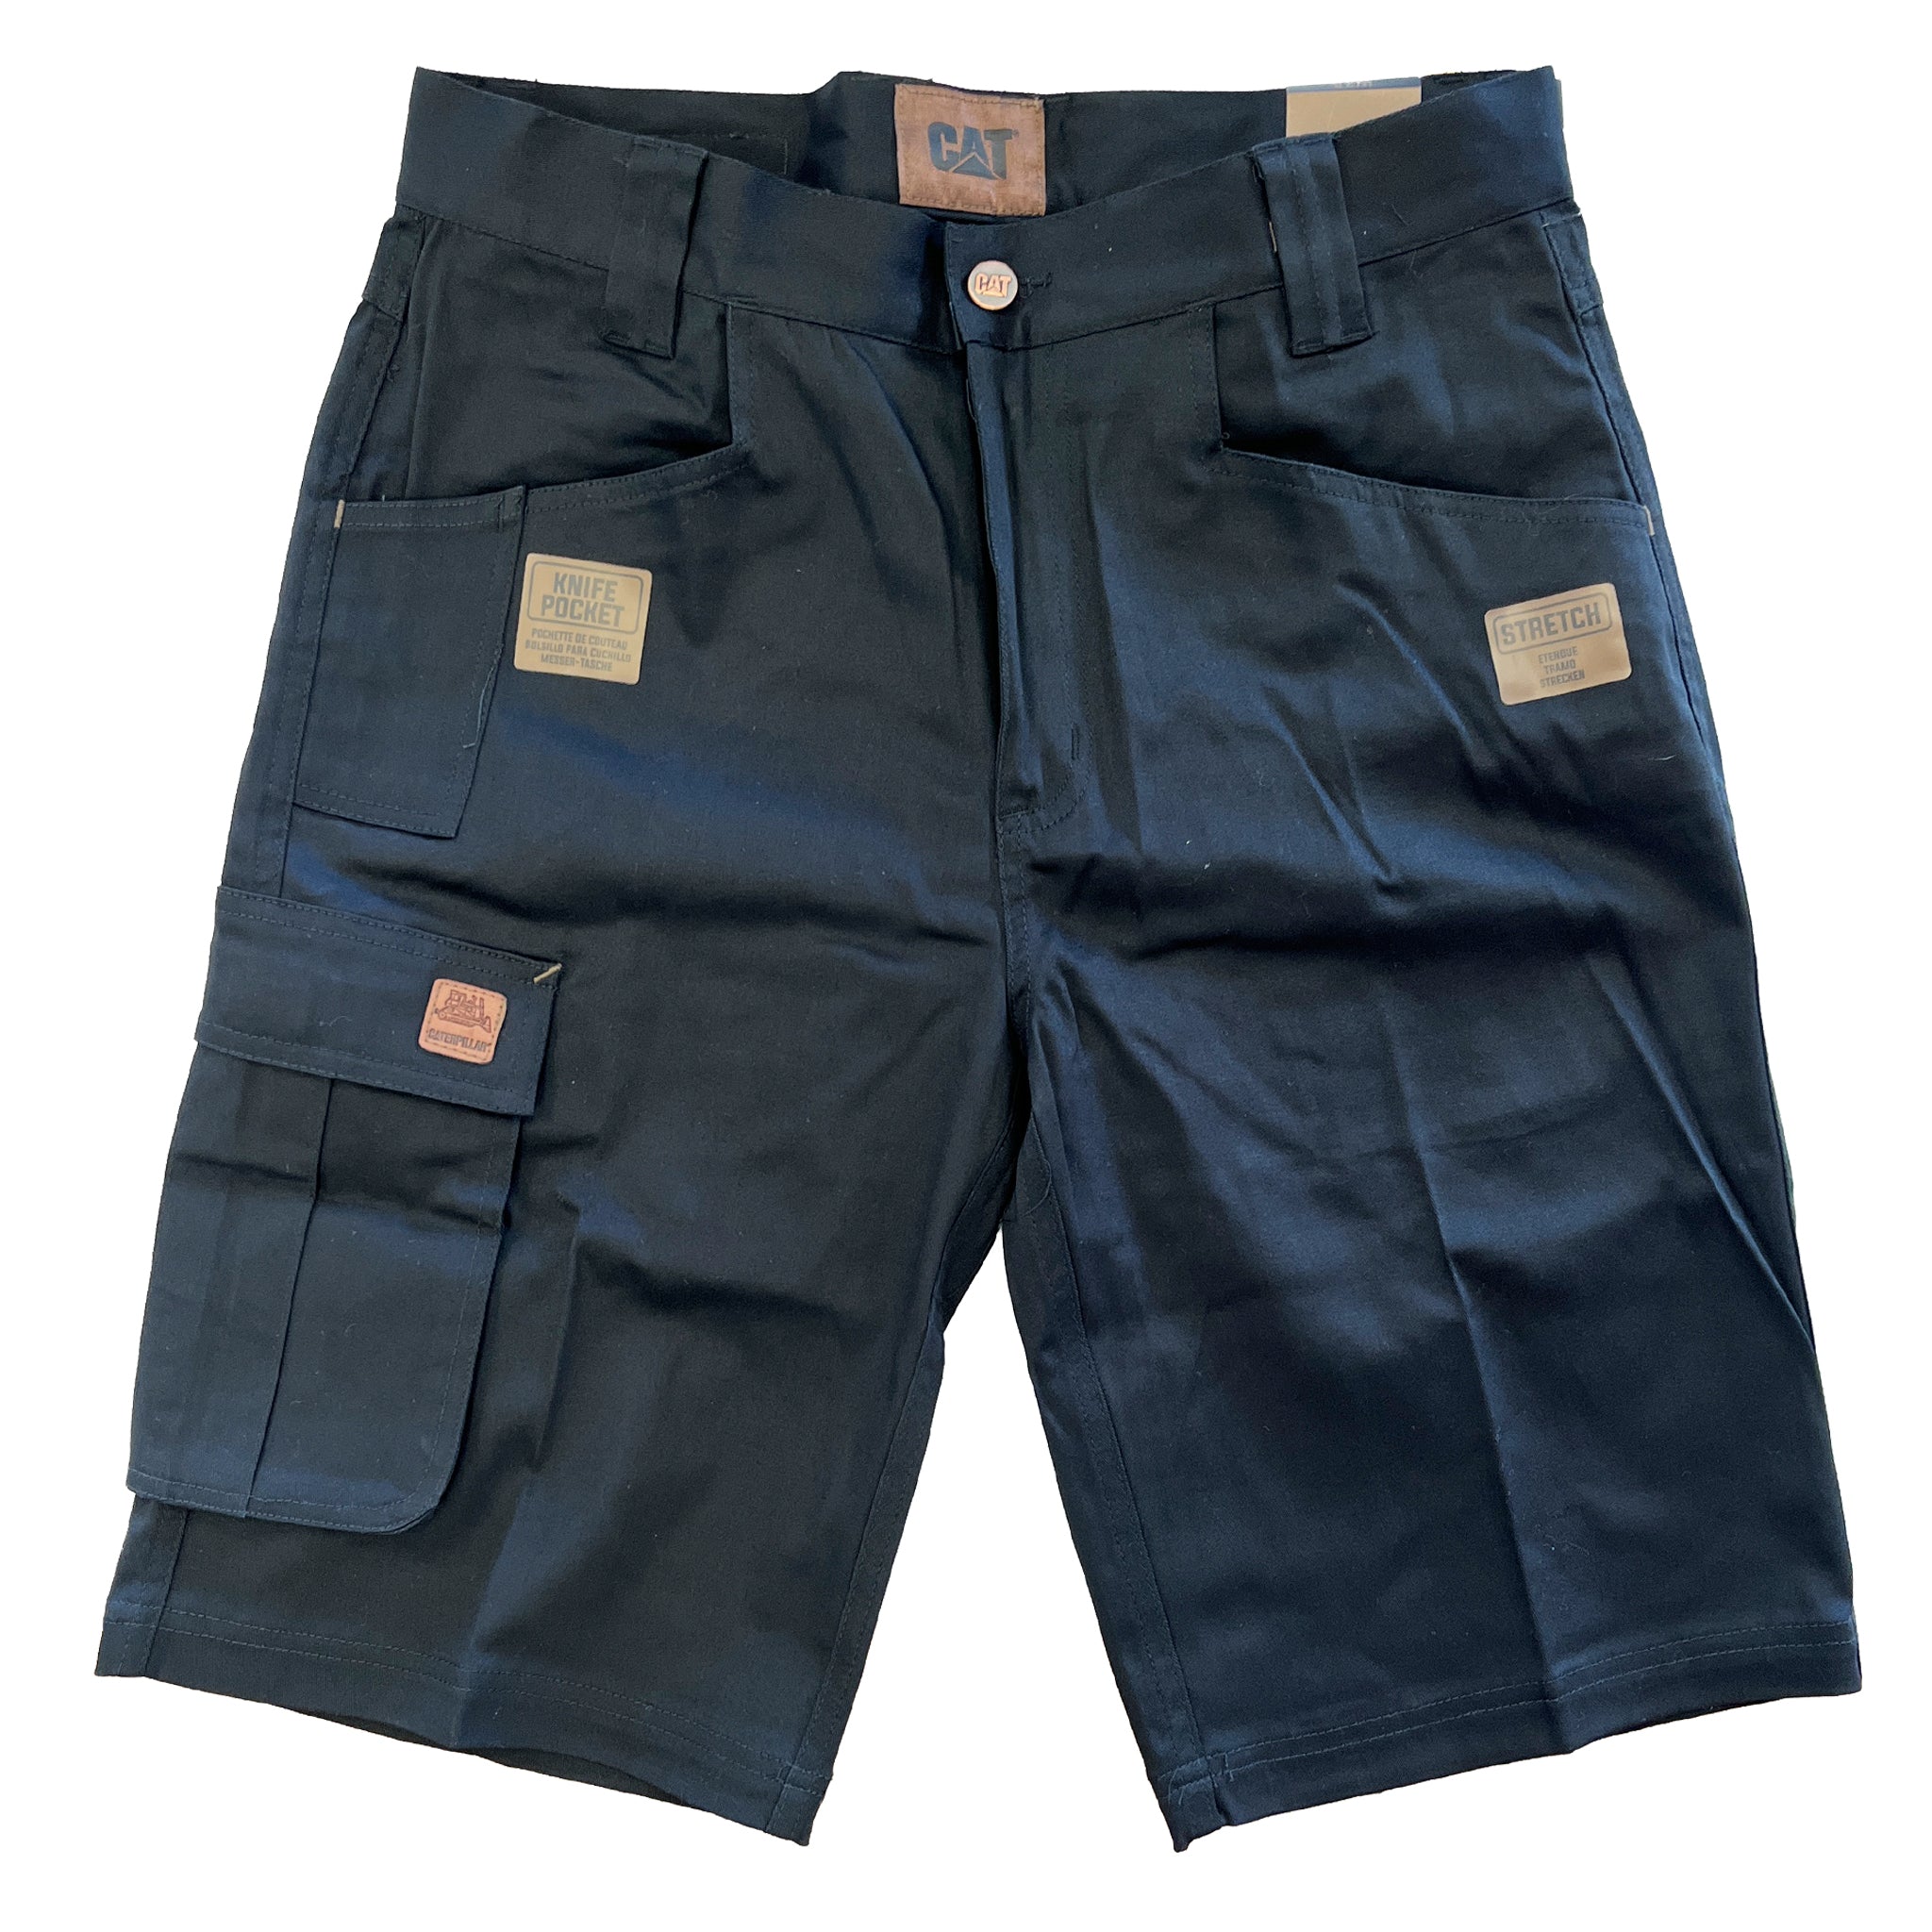 Caterpillar Men's Ag Cargo Short 1820012 – That Shoe Store and More